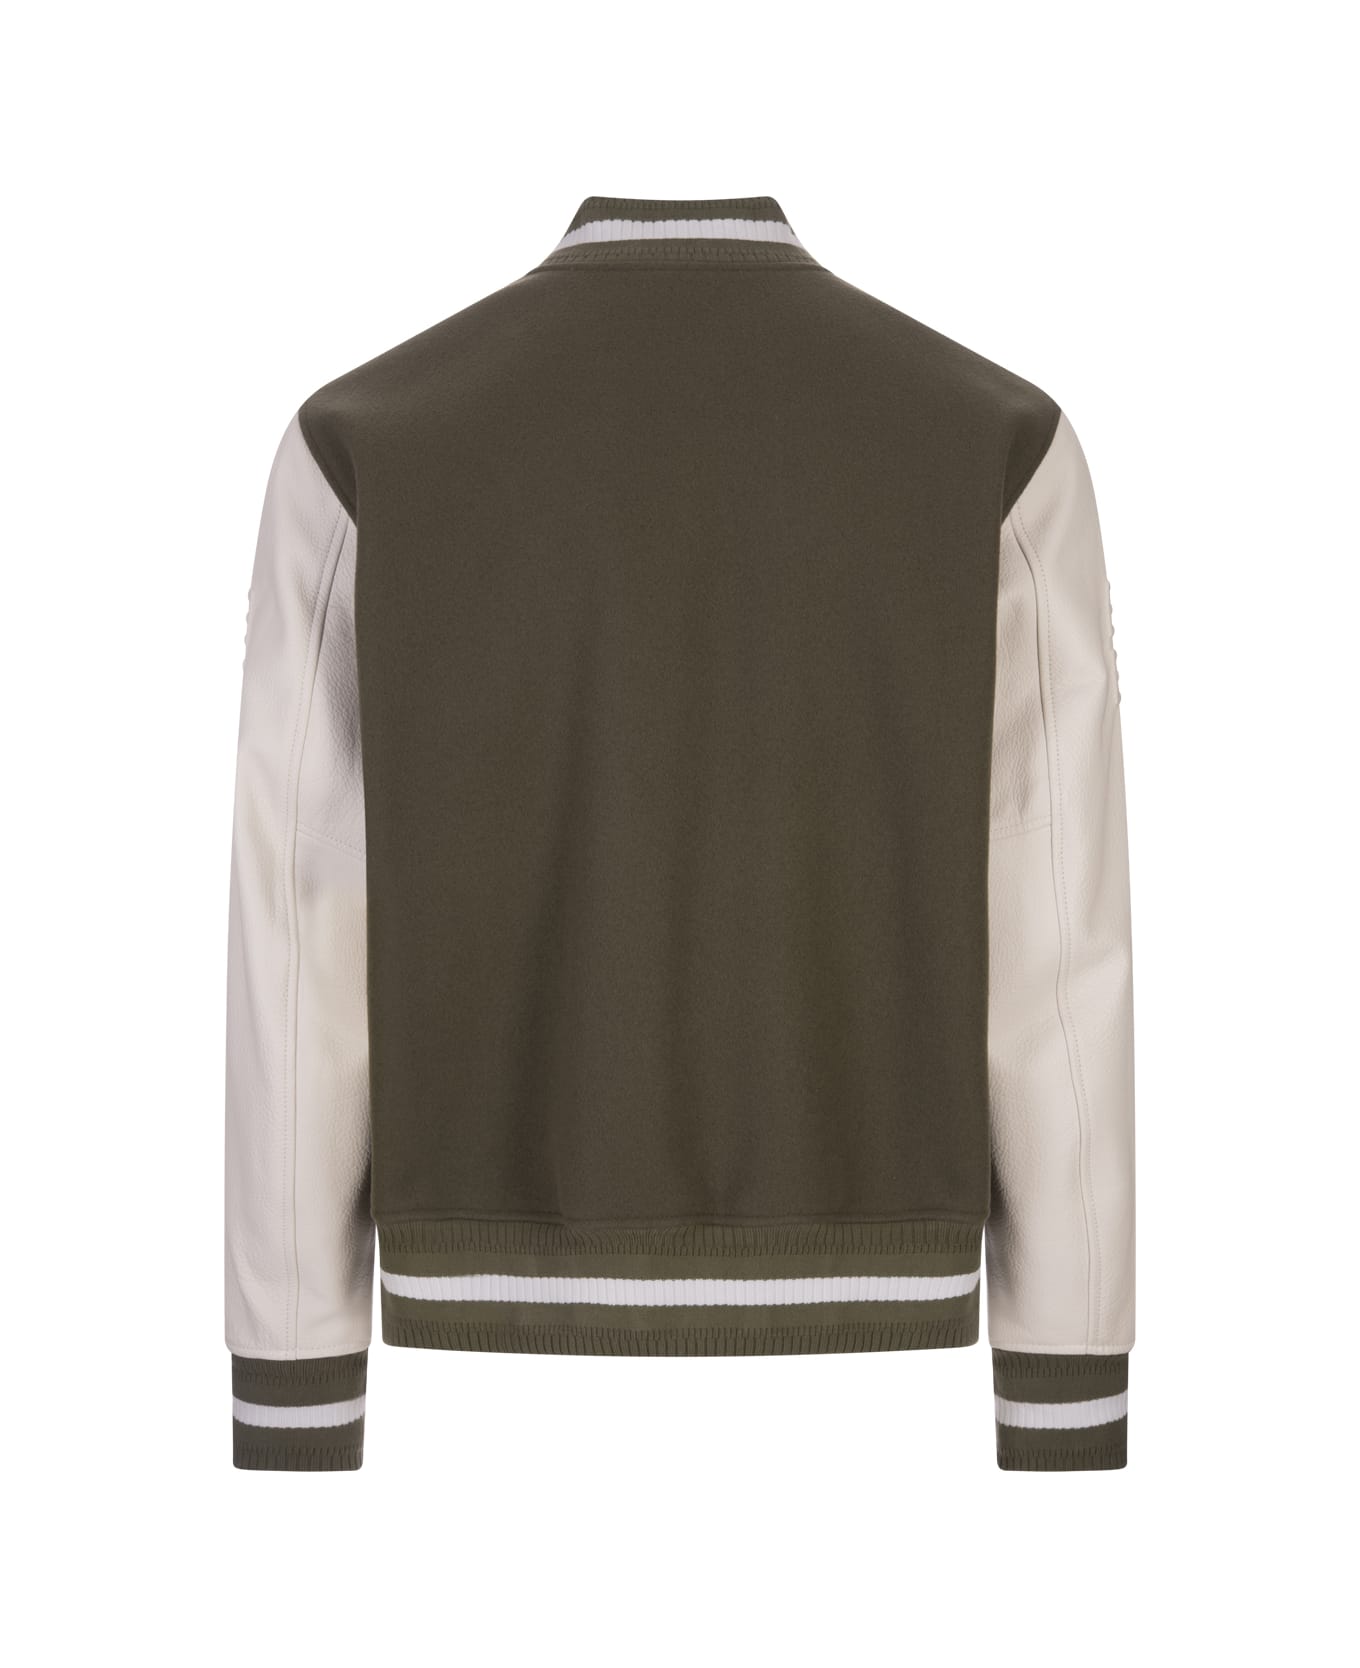 Givenchy Khaki And White Givenchy Bomber Jacket In Wool And Leather - Green コート＆ジャケット